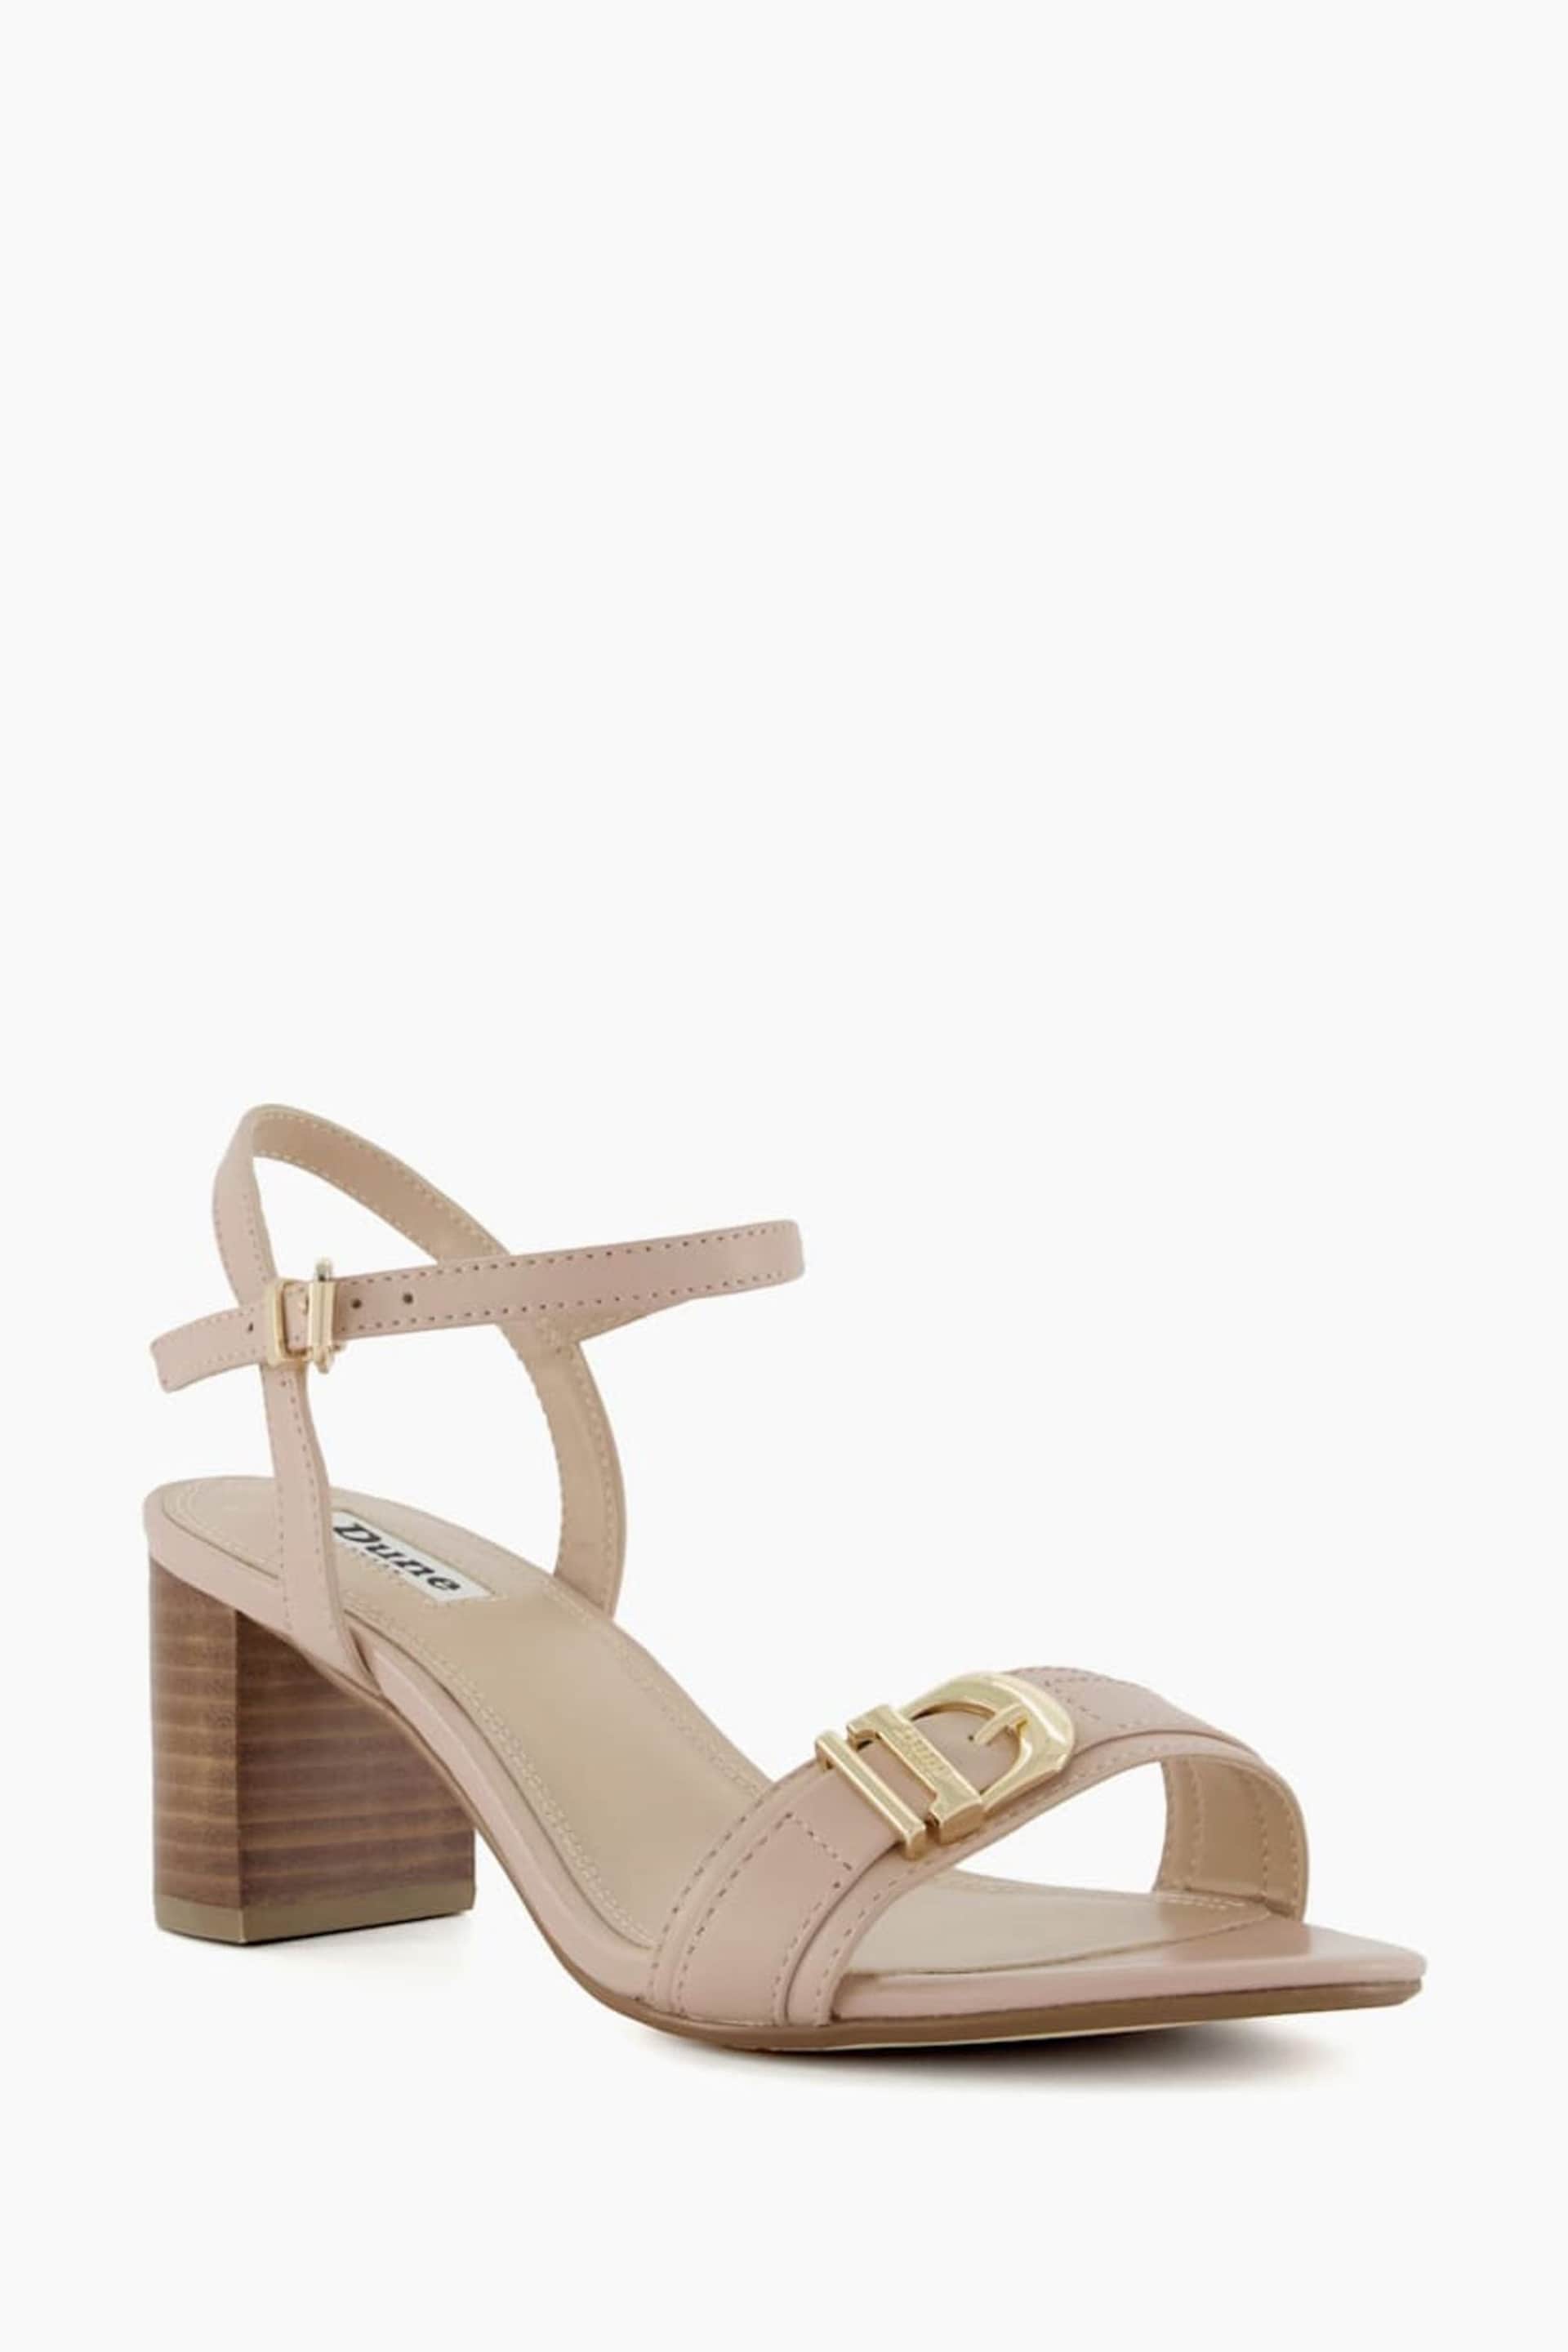 Dune London Pink Wide Fit Jessie Branded Buckle Heeled  Sandals - Image 4 of 6